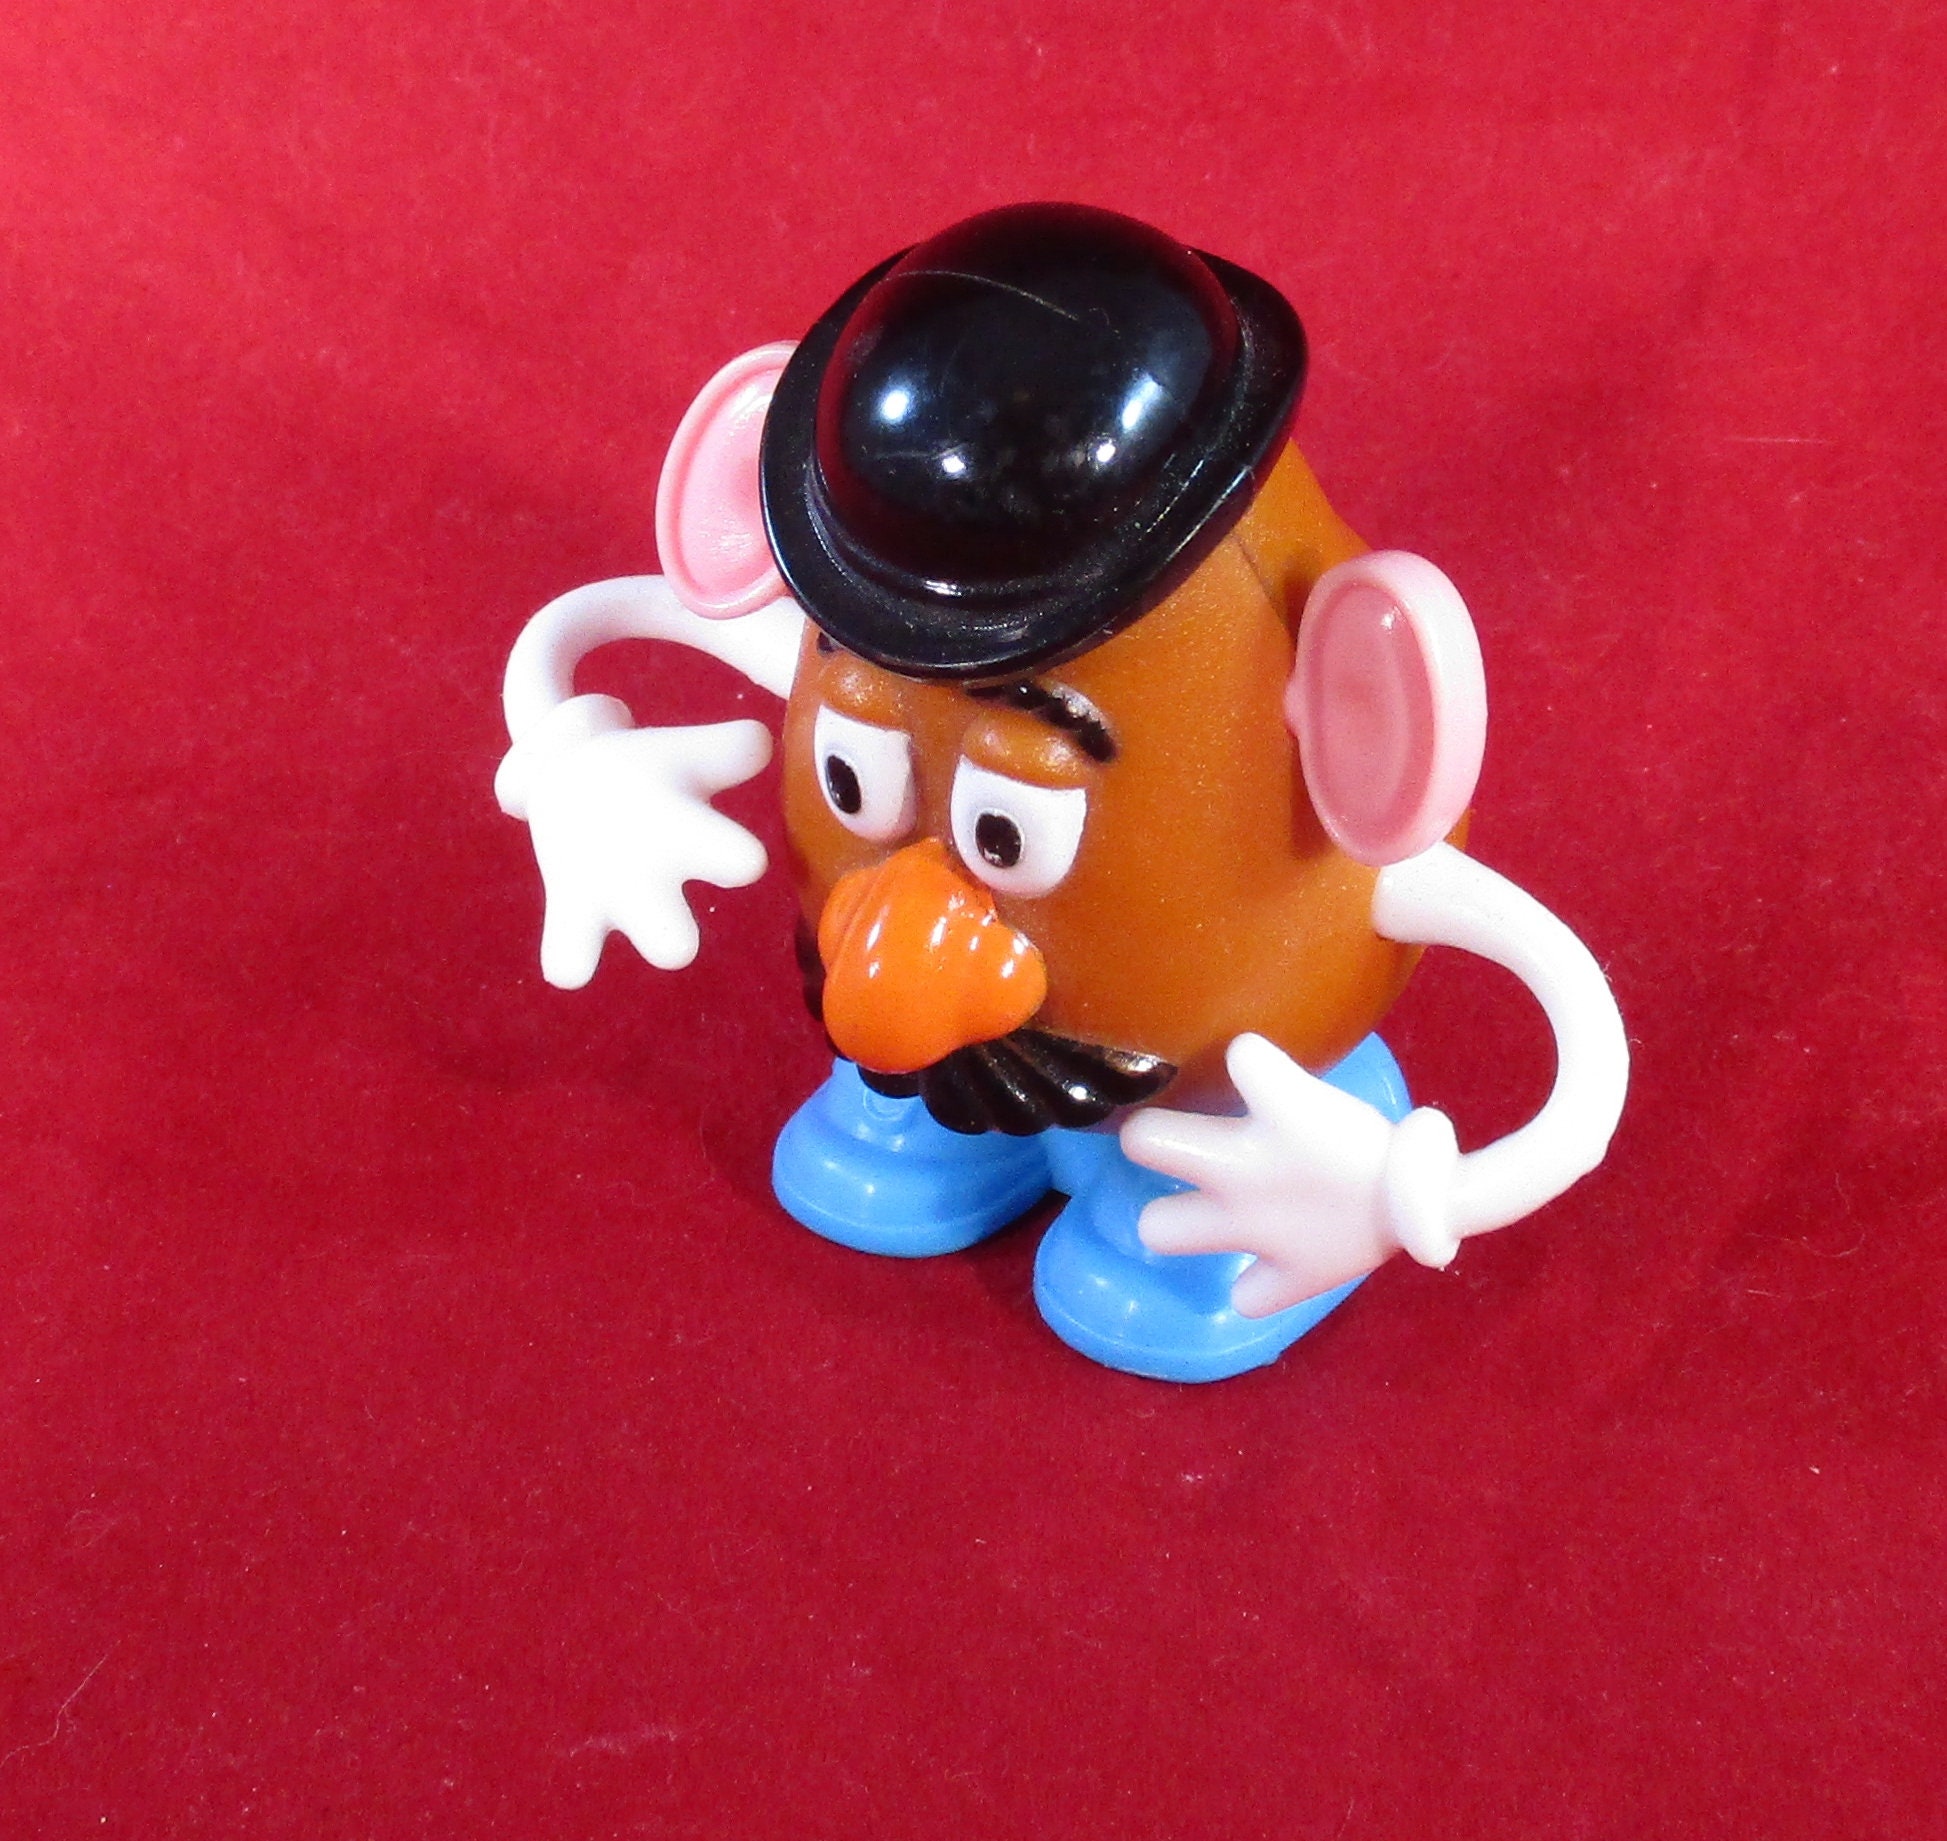 Details about   Burger King Toy Story Mr Potato Head Stuffed Plush Kid's Meal 1998 French Fries 